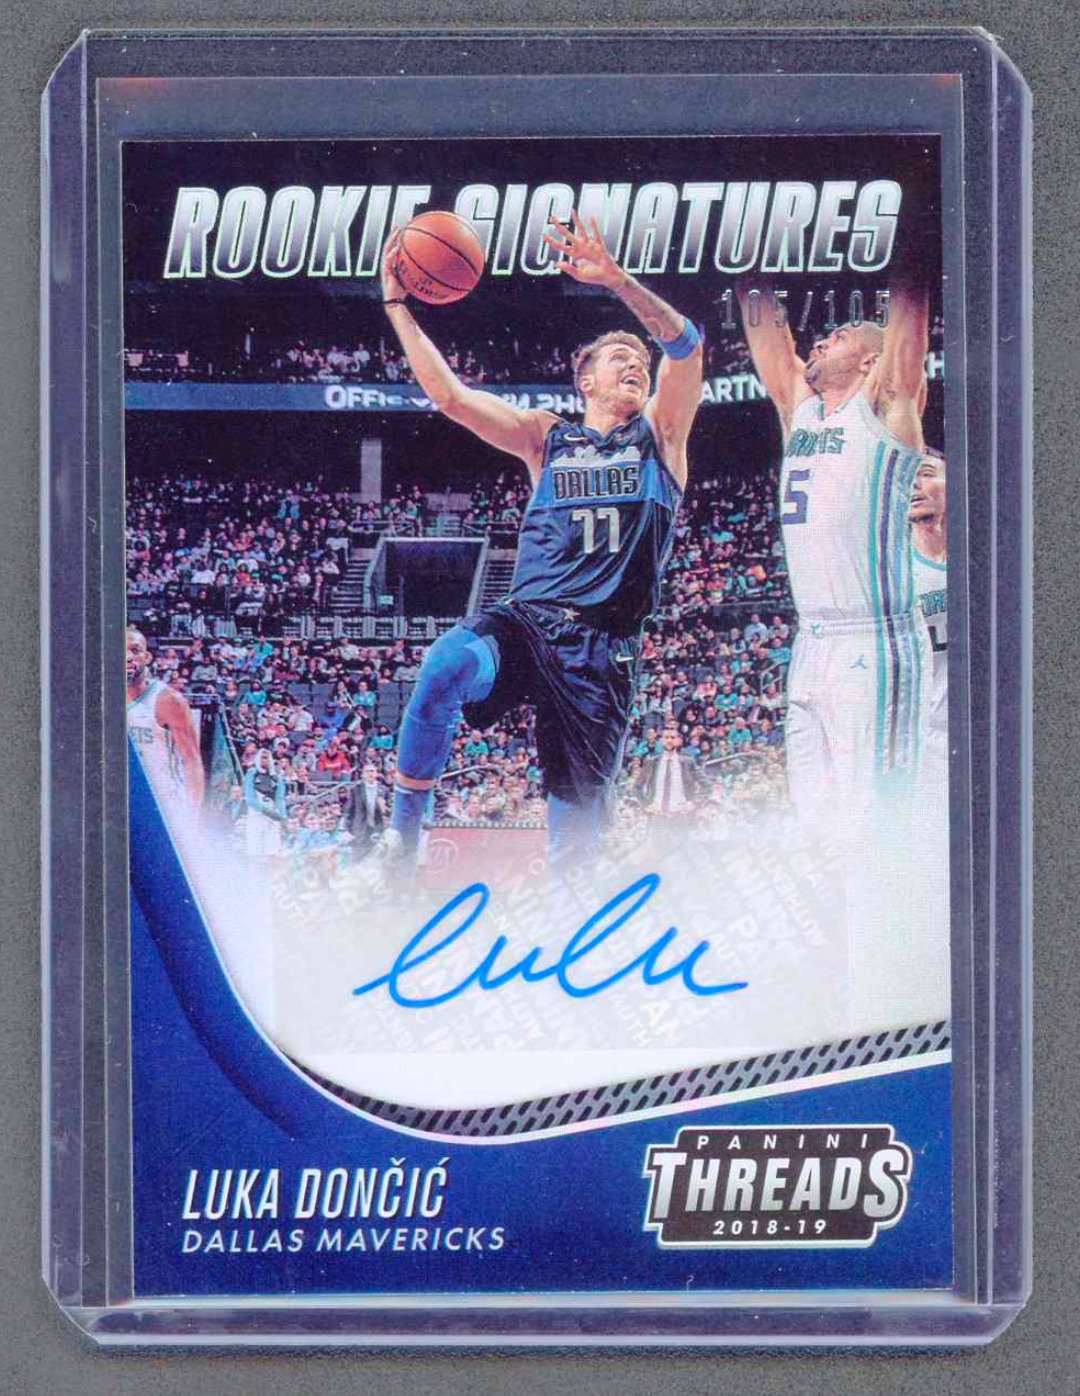 2018-19 Panini Threads Rookie Signatures #3 Luka Doncic RC /105